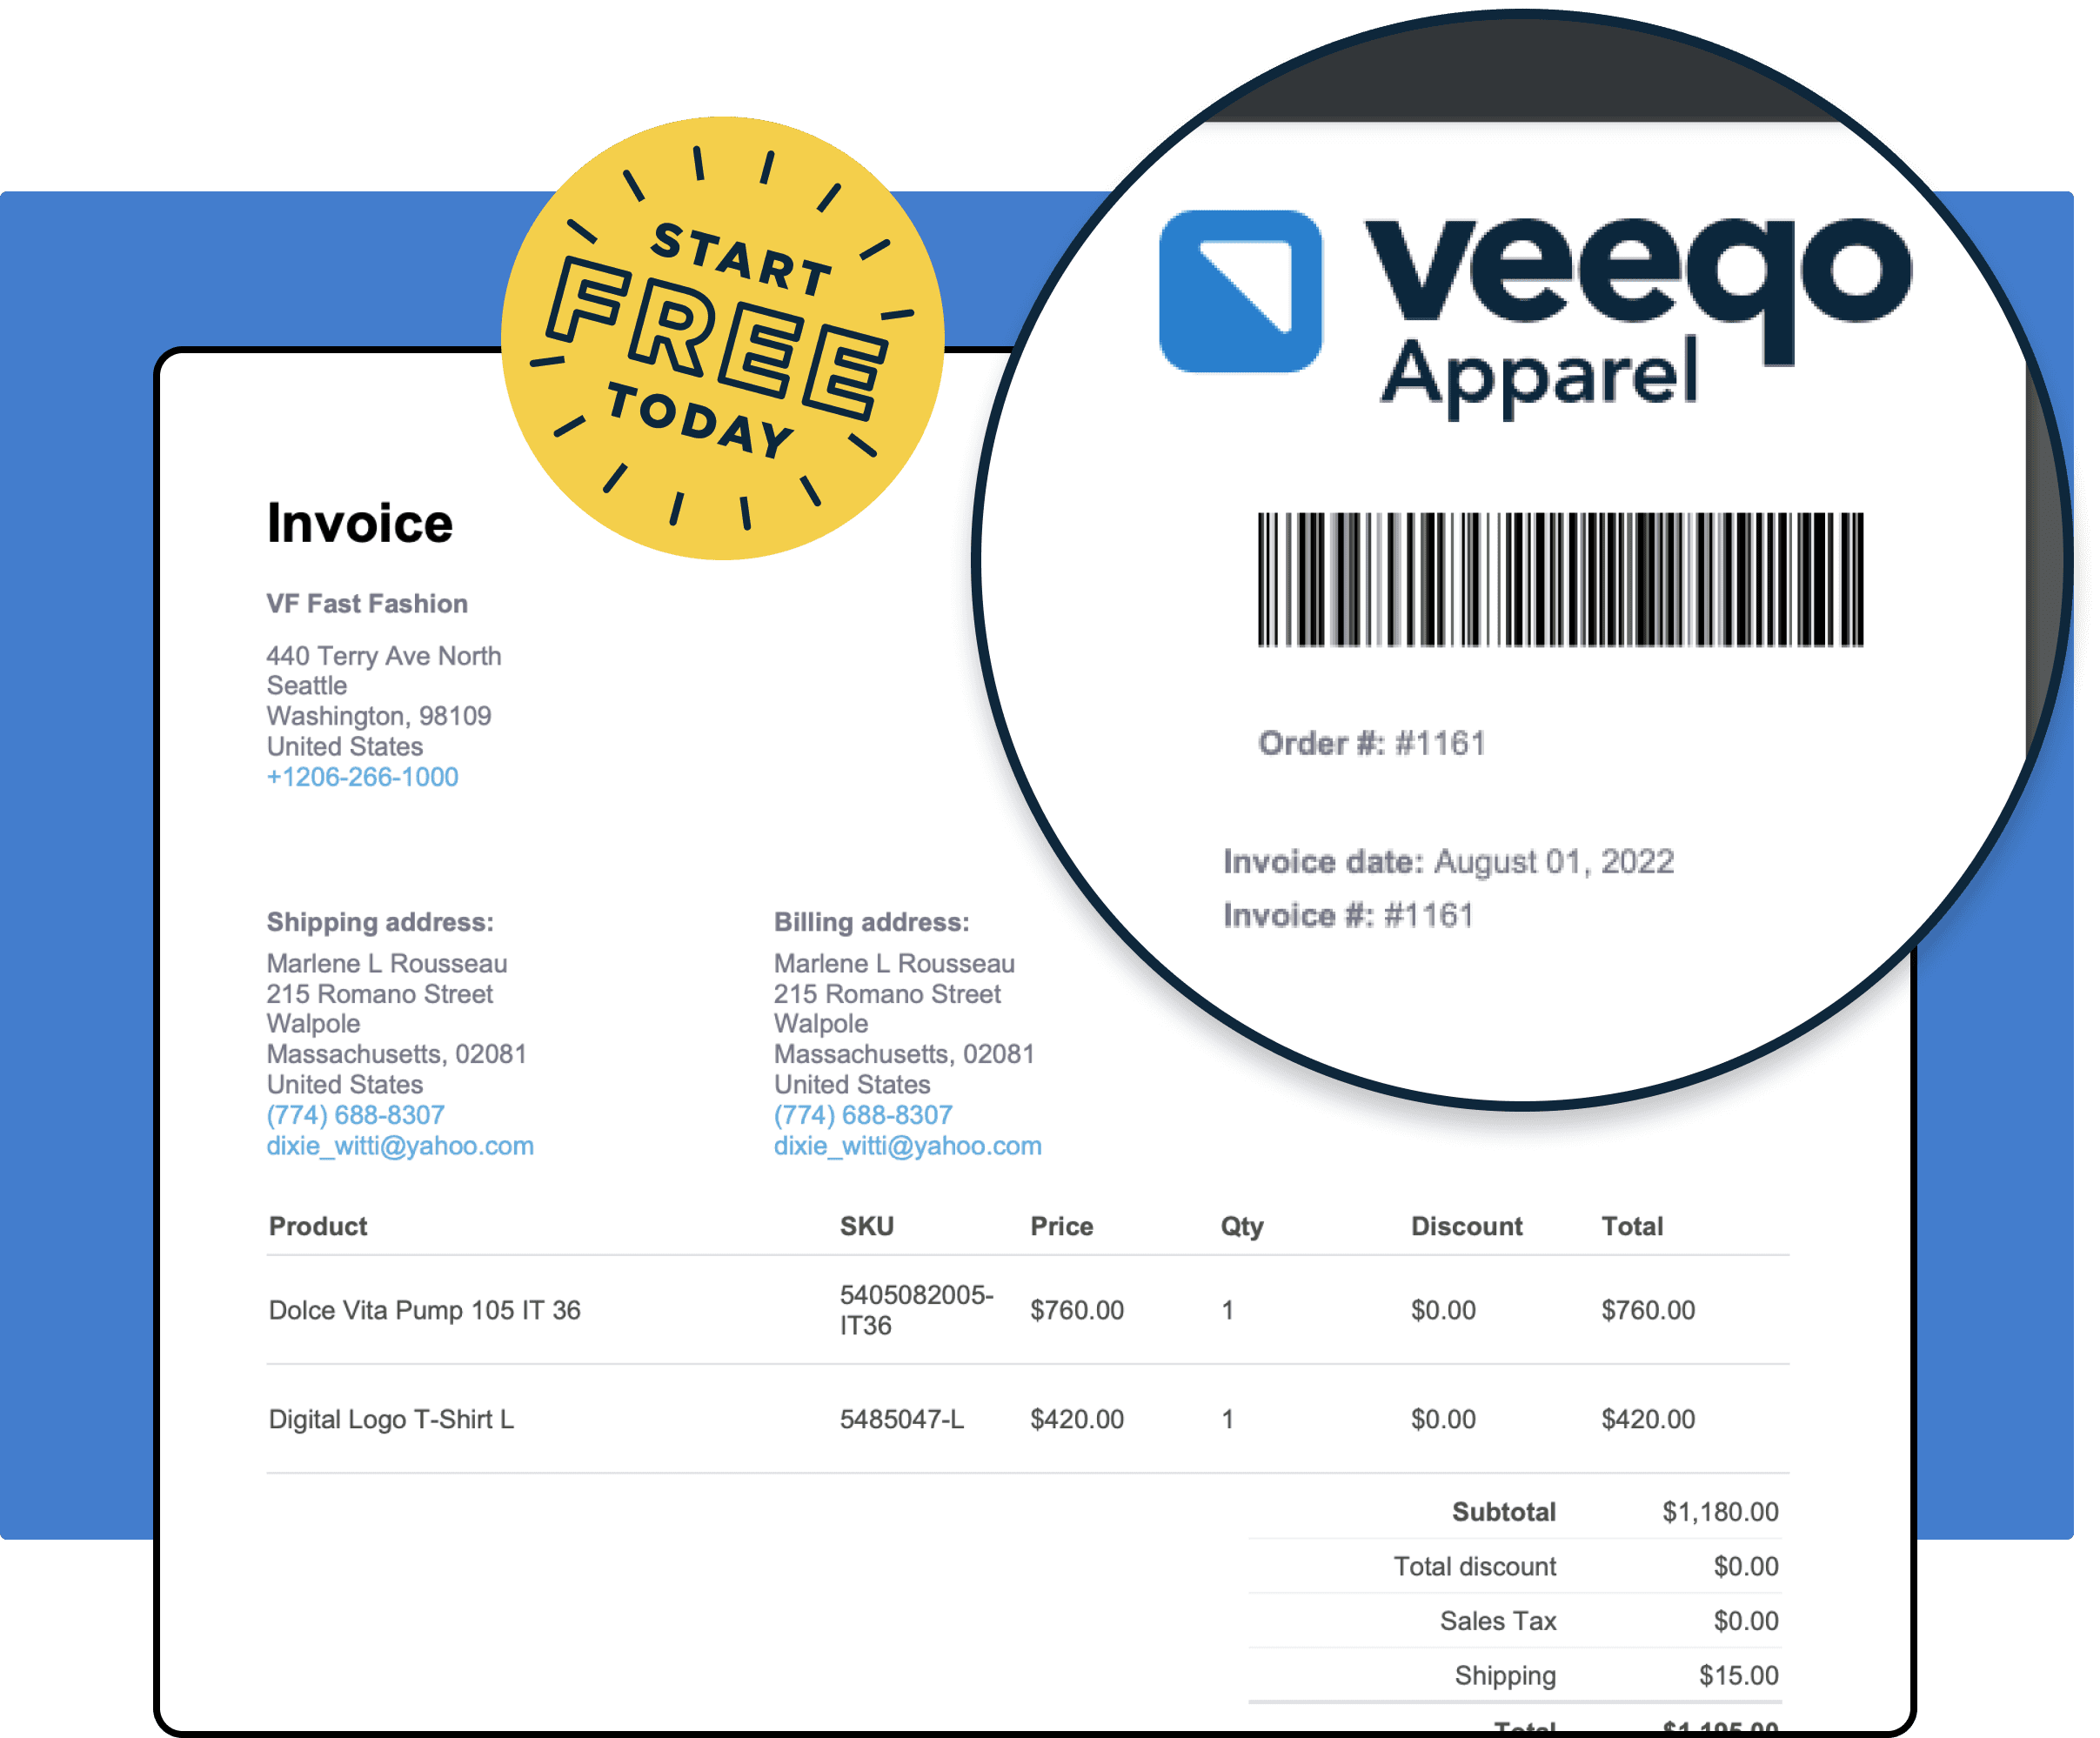 Customize packing slips, invoices, and tracking emails by adding your logo, so your customers always know it’s you. 